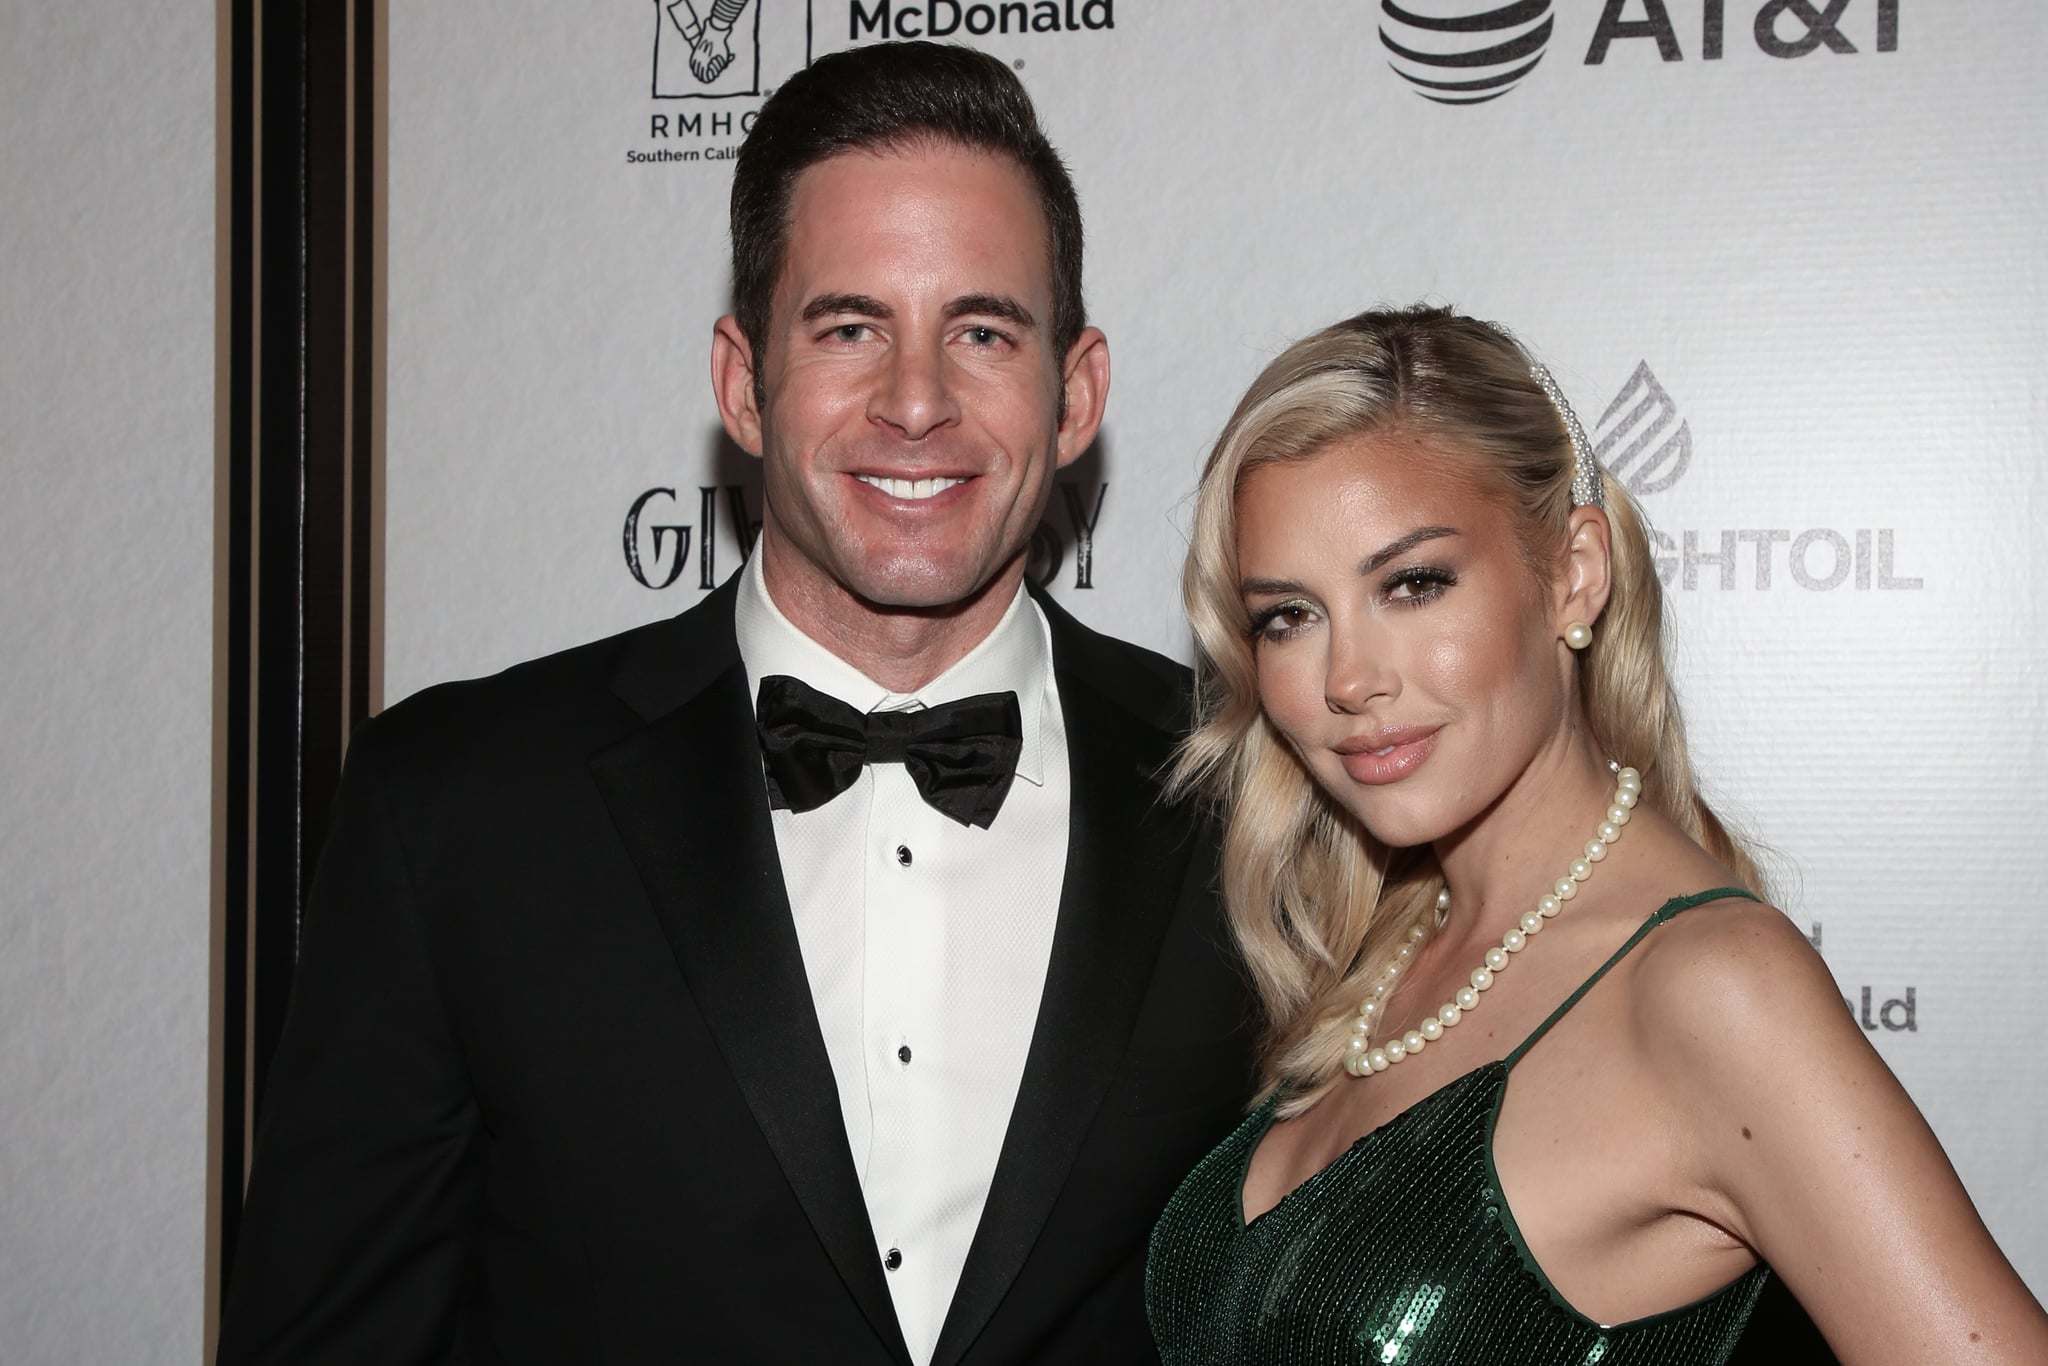 LOS ANGELES, CALIFORNIA - NOVEMBER 07: Reality TV Personalities Tarek El Moussa (L) and Heather Rae Young (R) attend the Give Easy event hosted by Ronald McDonald House Los Angeles at Avalon Hollywood on November 07, 2019 in Los Angeles, California. (Photo by Paul Archuleta/Getty Images)